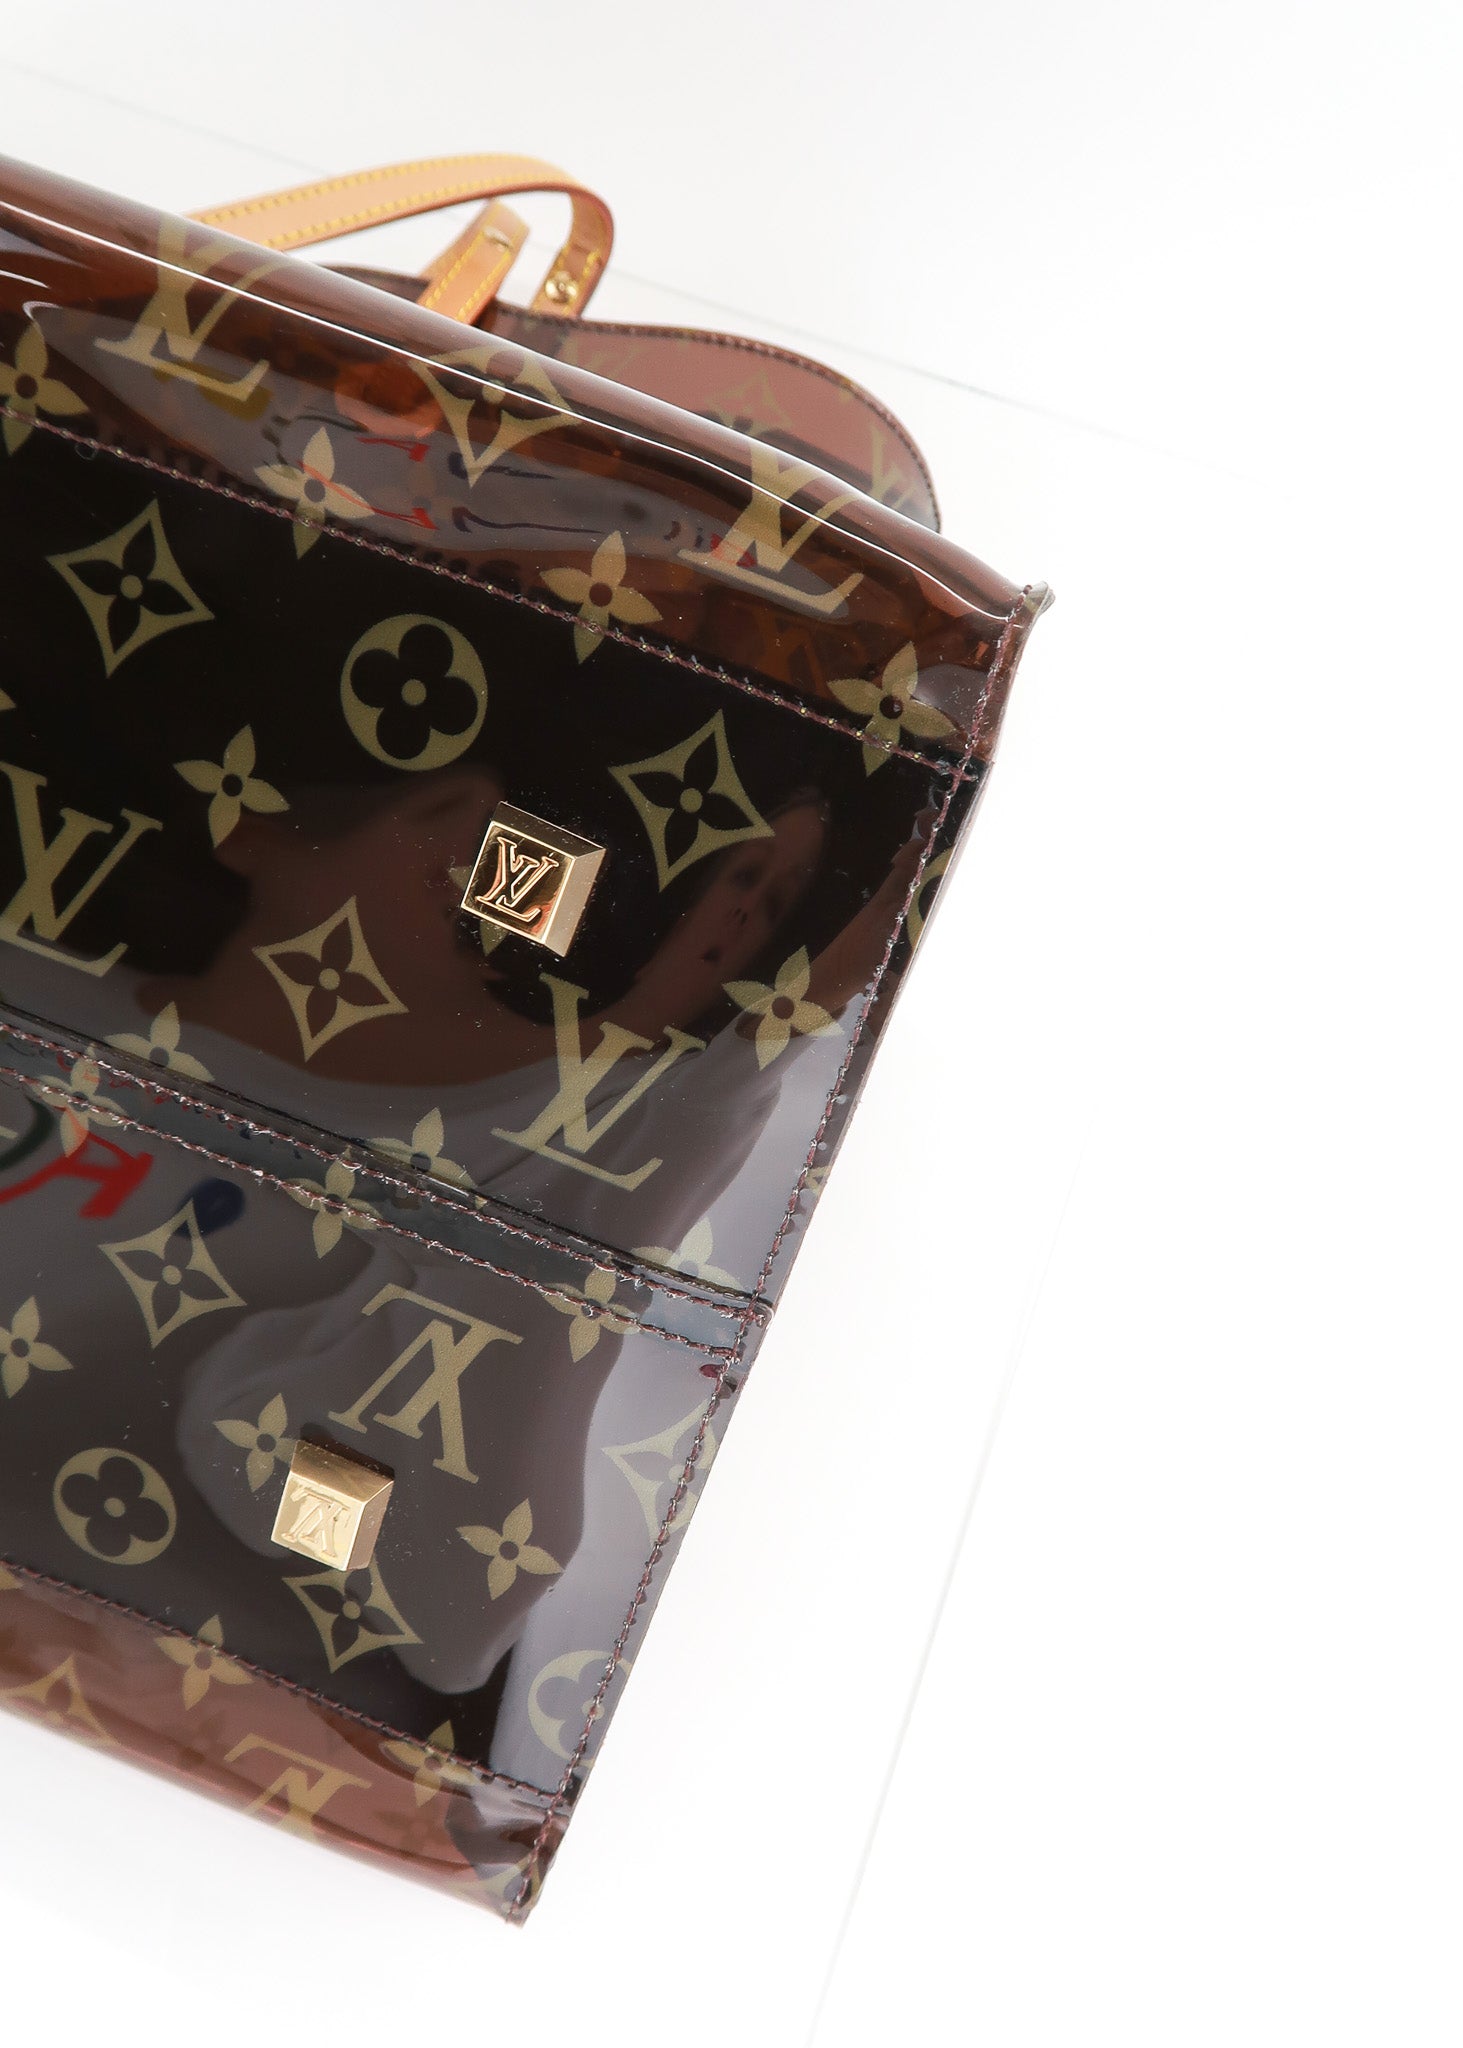 Search results for: 'Louis+Vuitton+Monogram++Cruise+Bag